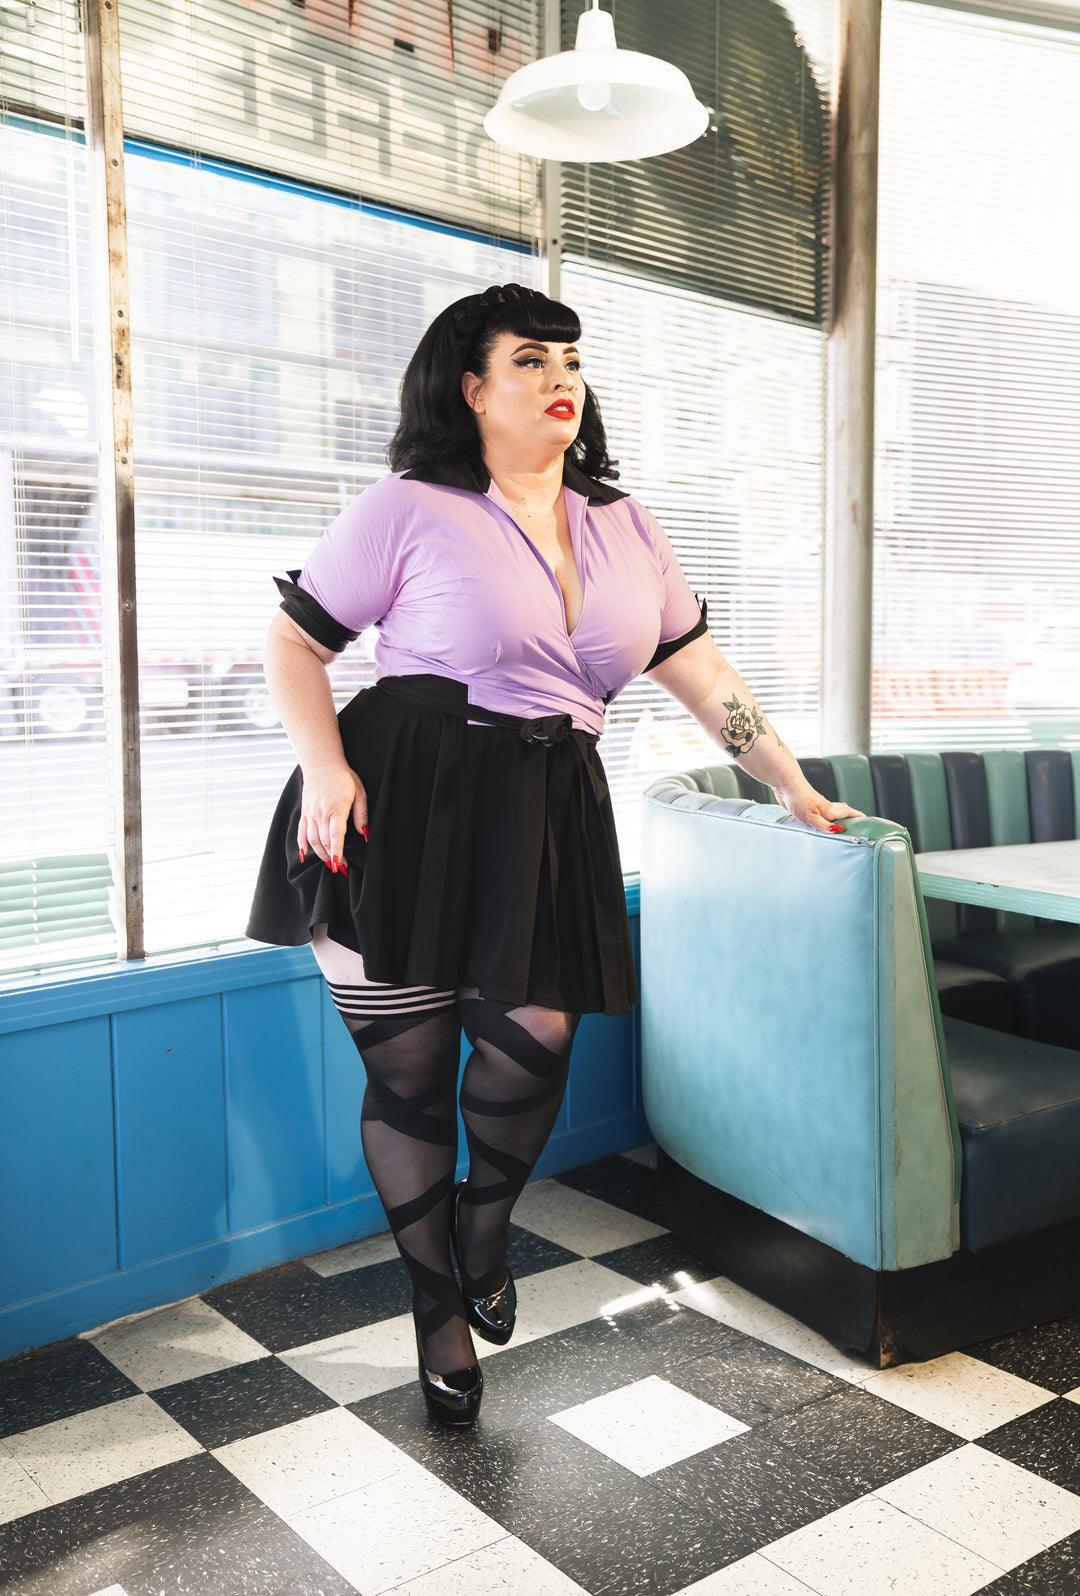 JACKIE: BLACK BALLET THIGH HIGHS. PETITE TO PLUS SIZE - KIXIES - The Sock Monster